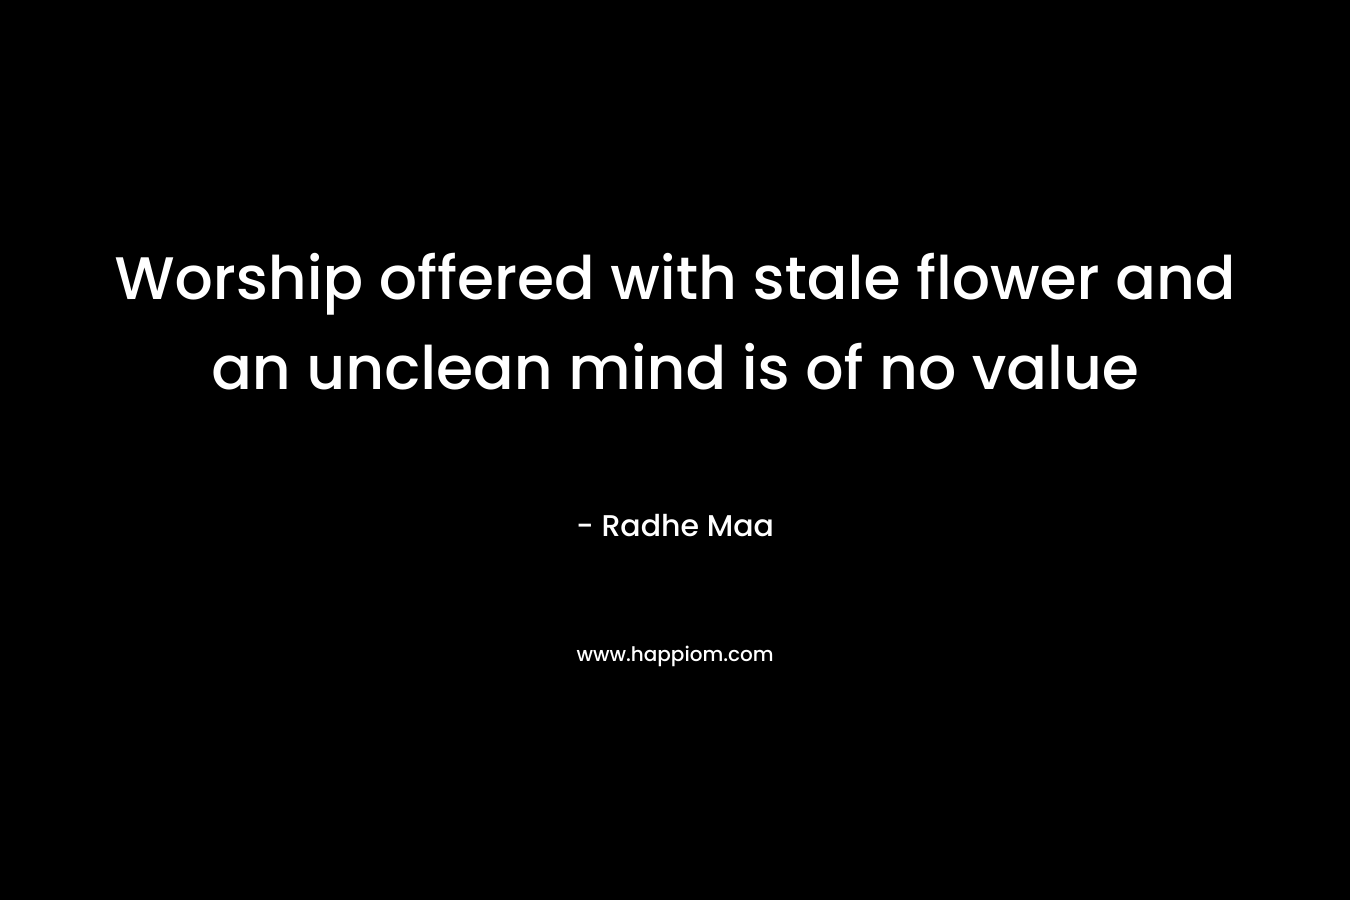 Worship offered with stale flower and an unclean mind is of no value